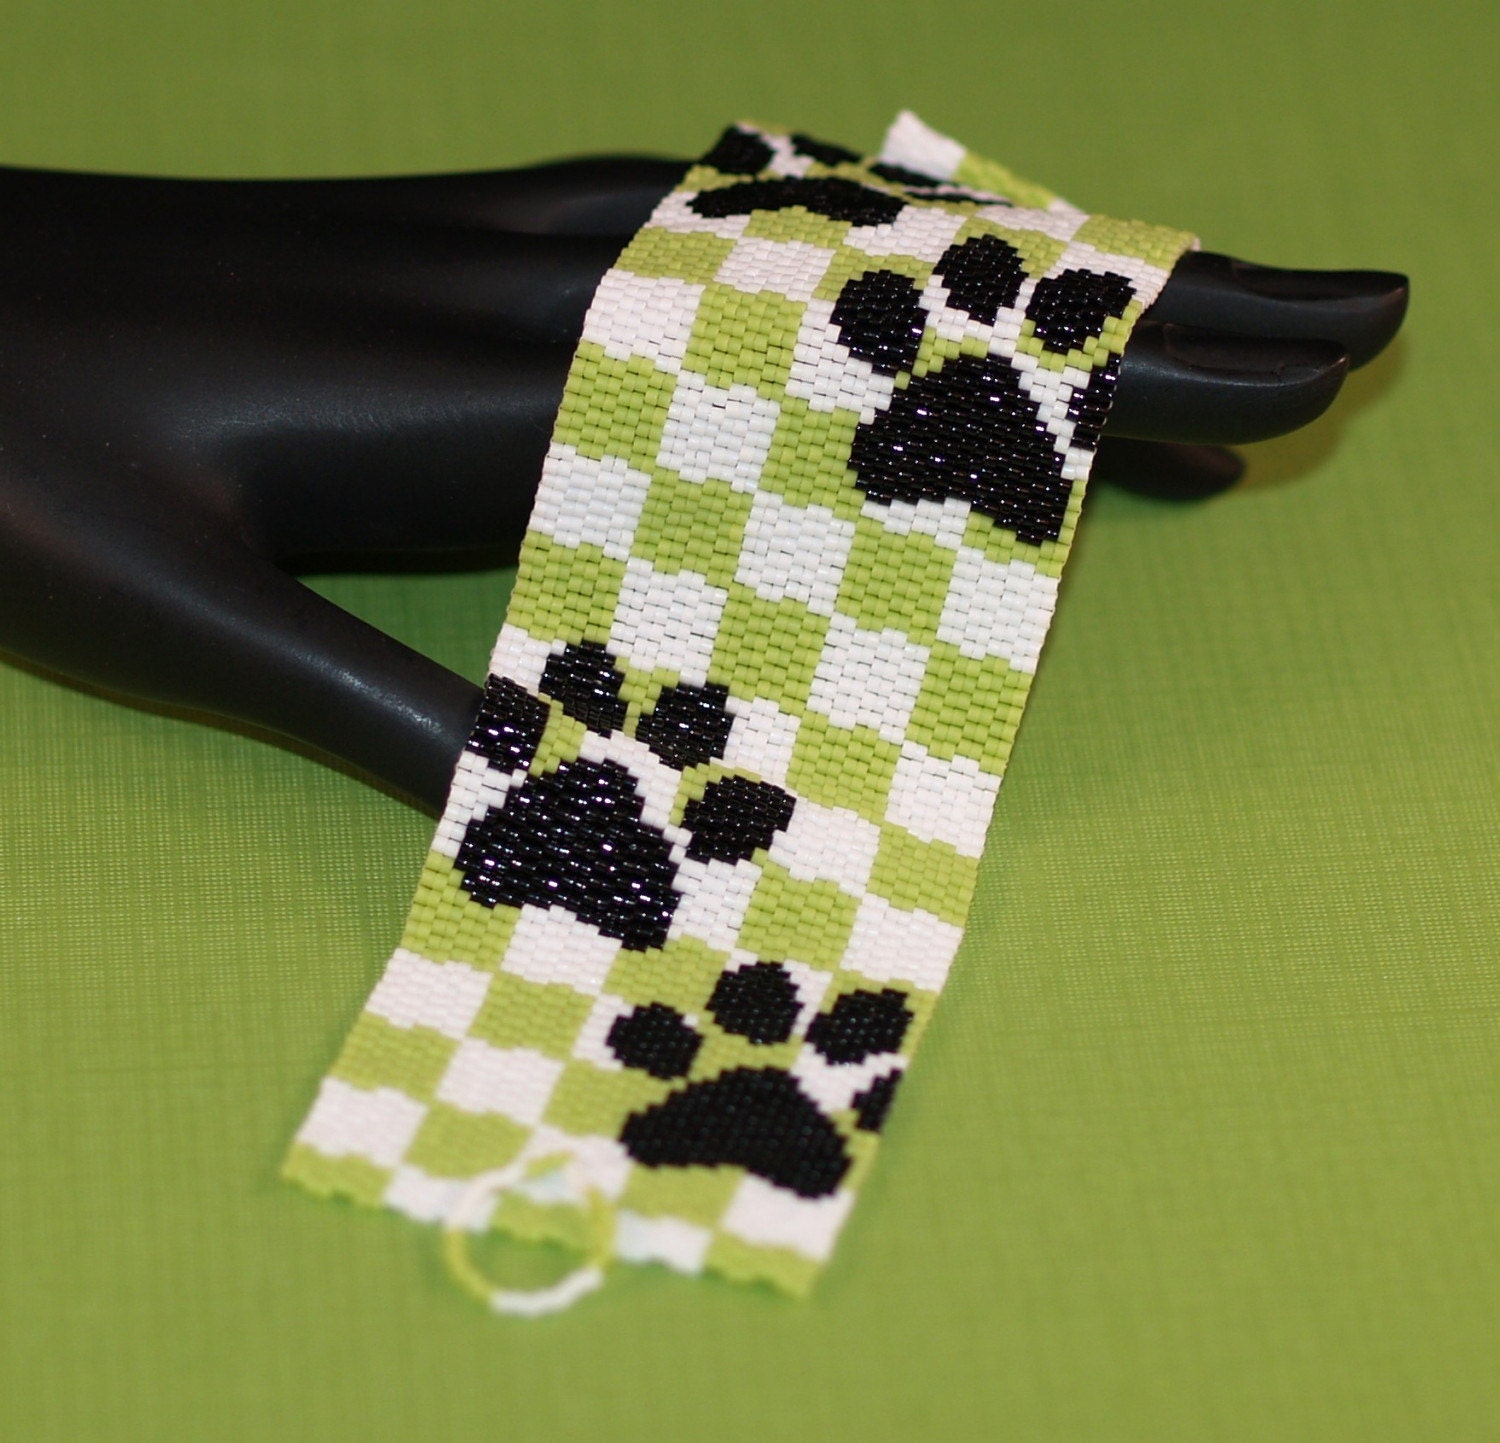 Cat Prints on a Lime Green Quilt - Peyote Bracelet / Cuff (3159)